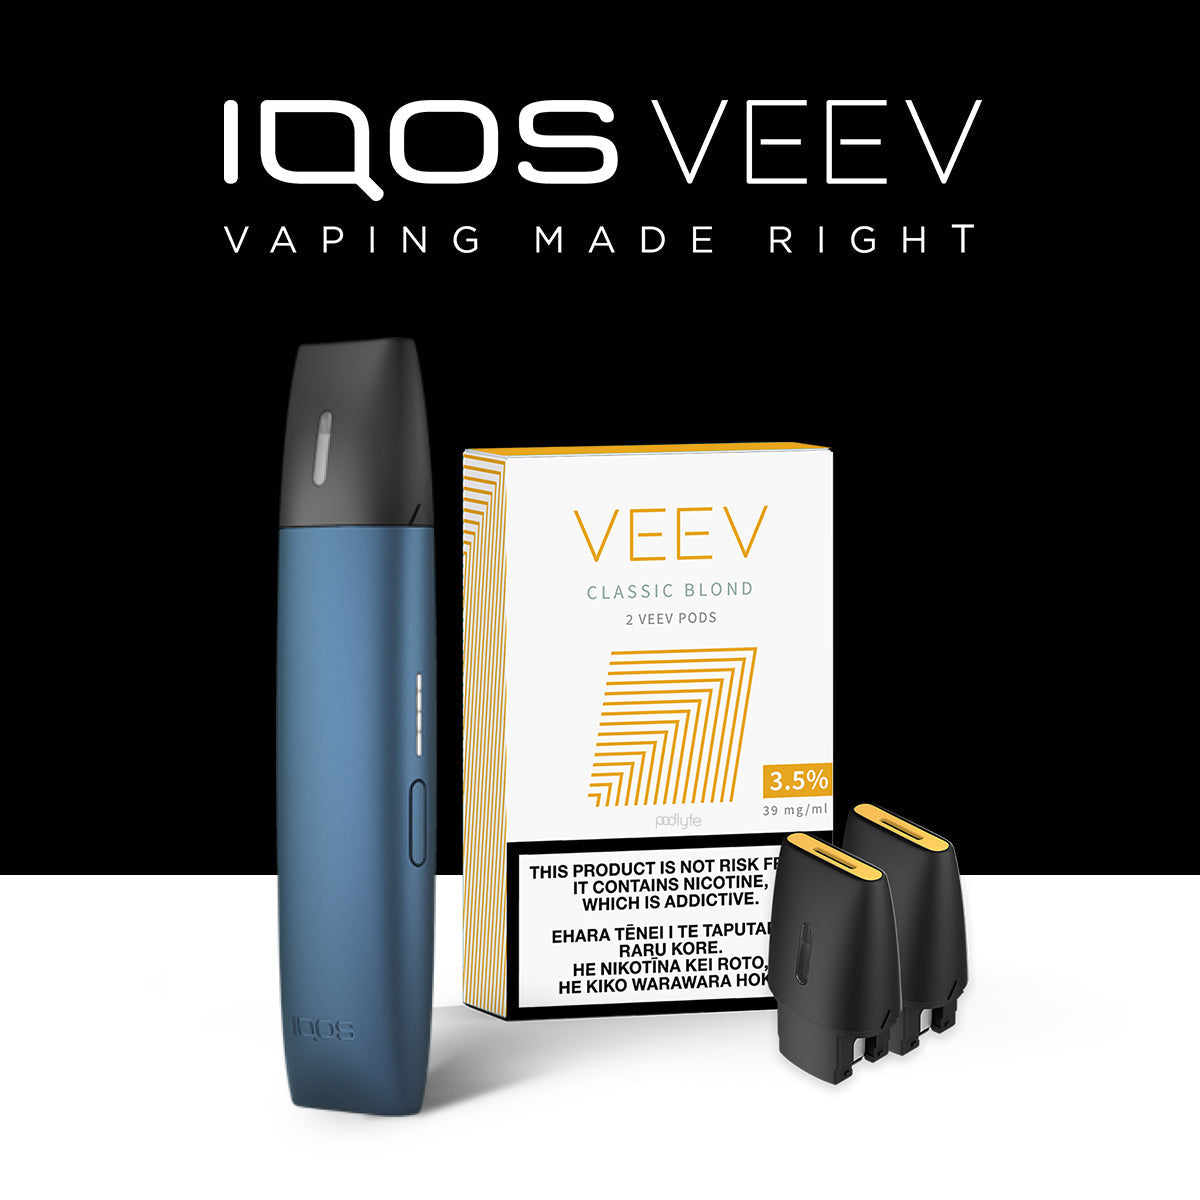 IQOS VEEV Device Bundle Prefilled Pod Systems Marine Blue Classic Mint 39mg (3.5%) nicotine vape available in Australia